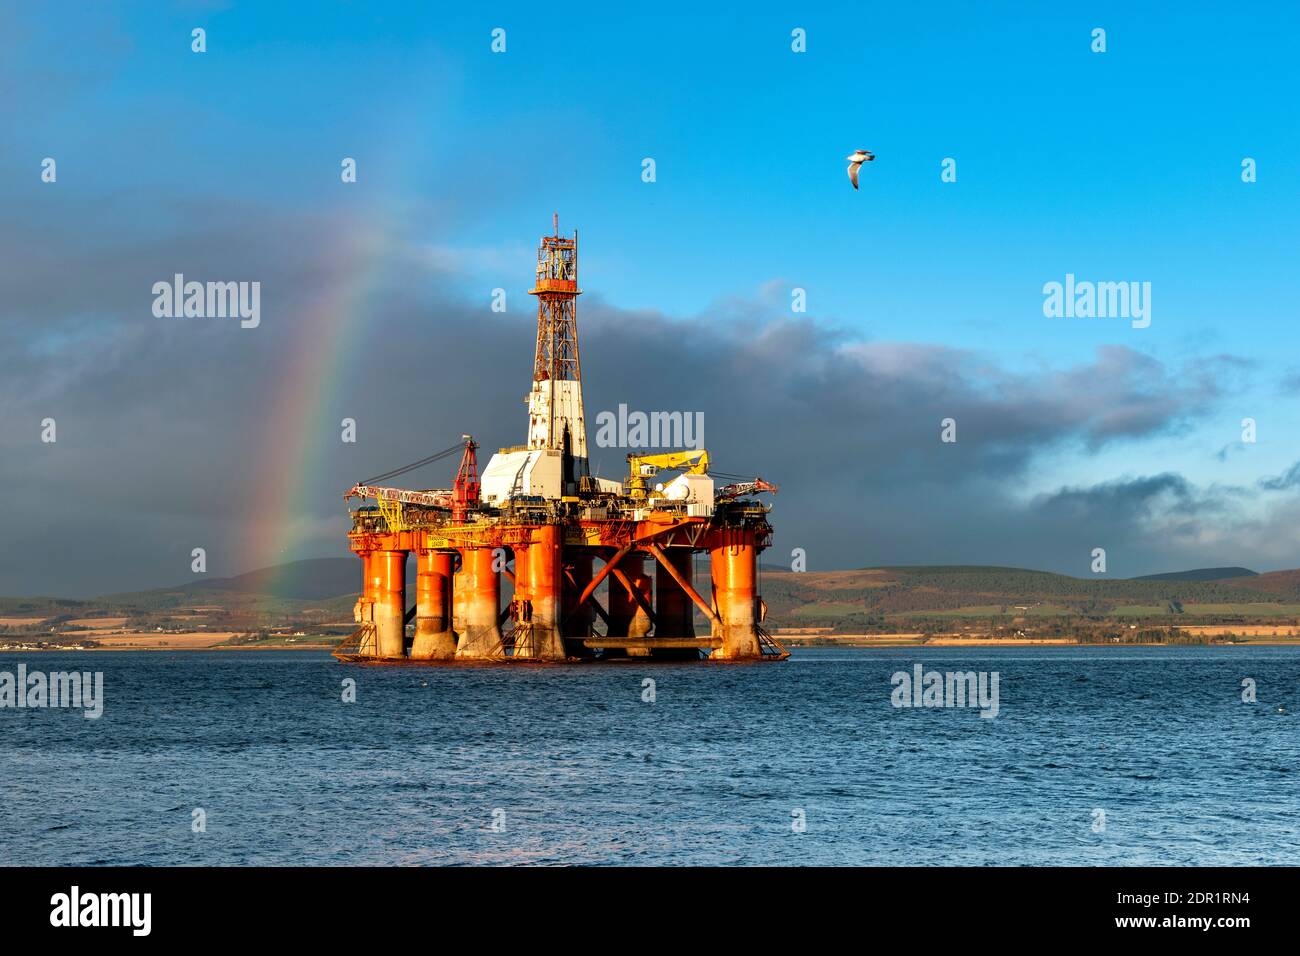 CROMARTY BLACK ISLE PENINSULAR SCOTLAND RAINBOW COLOURS AND OIL PLATFORM OR RIG IN THE CROMARTY FIRTH Stock Photo